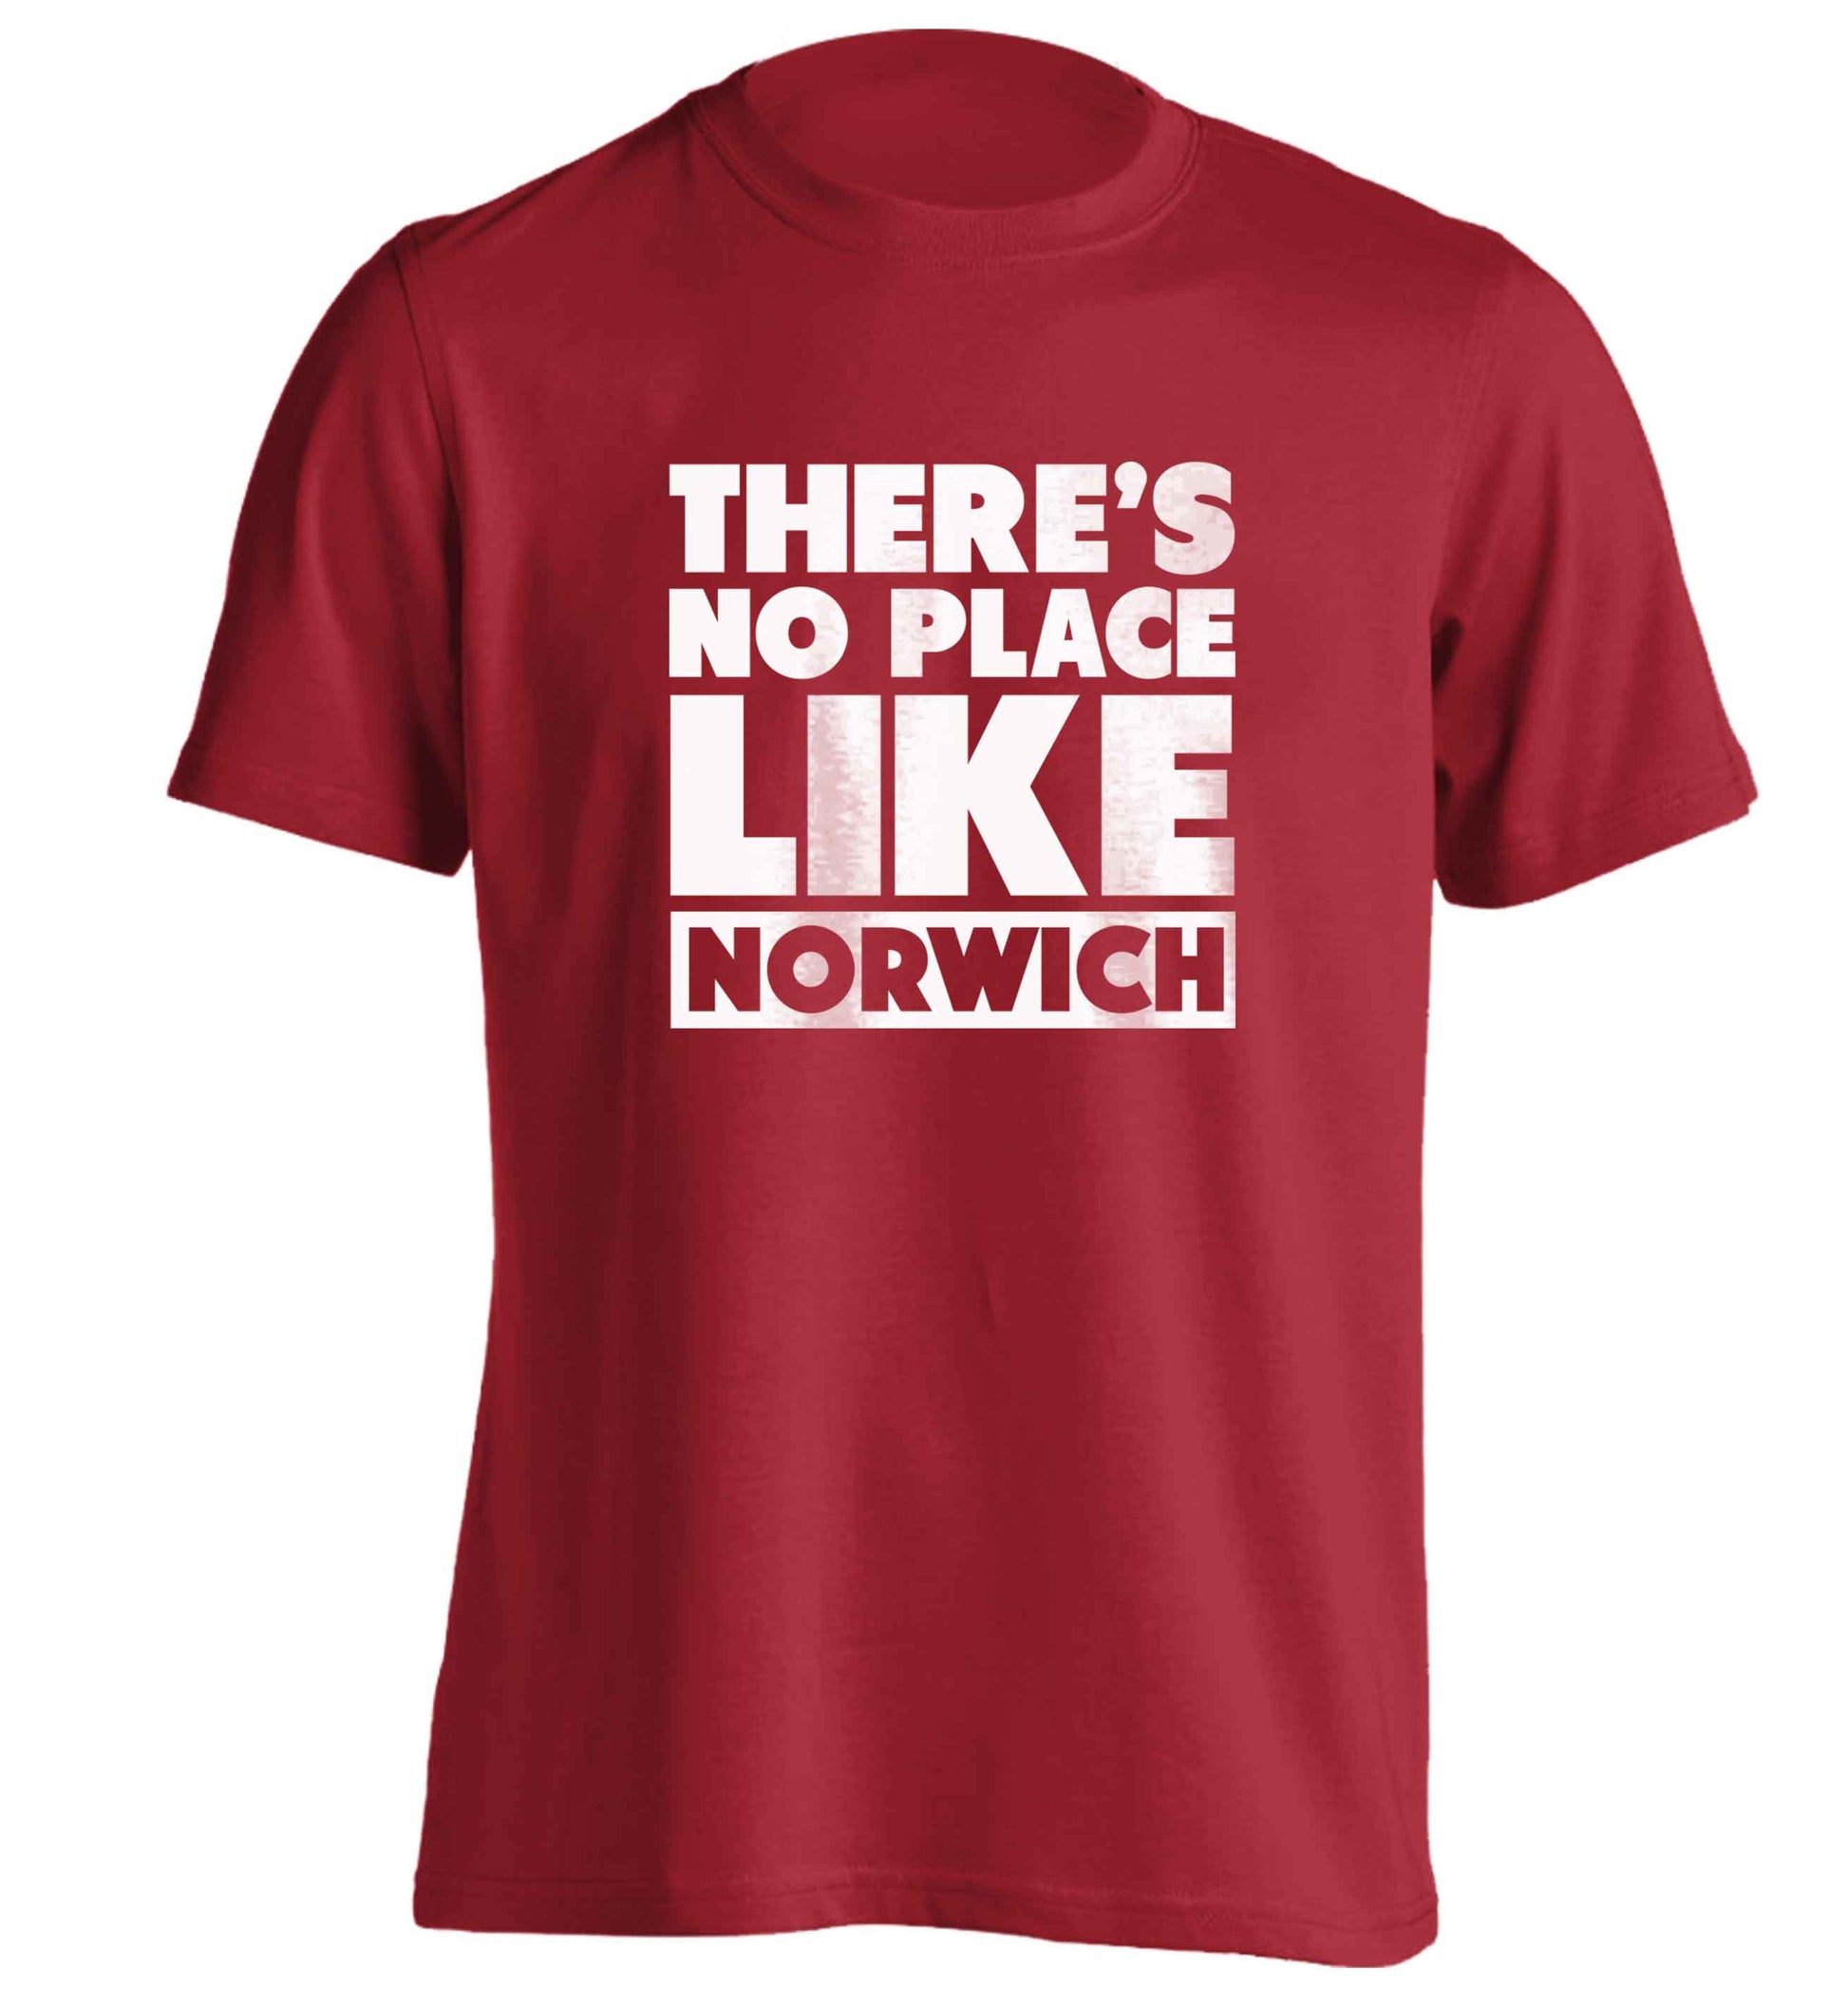 There's no place like Norwich adults unisex red Tshirt 2XL